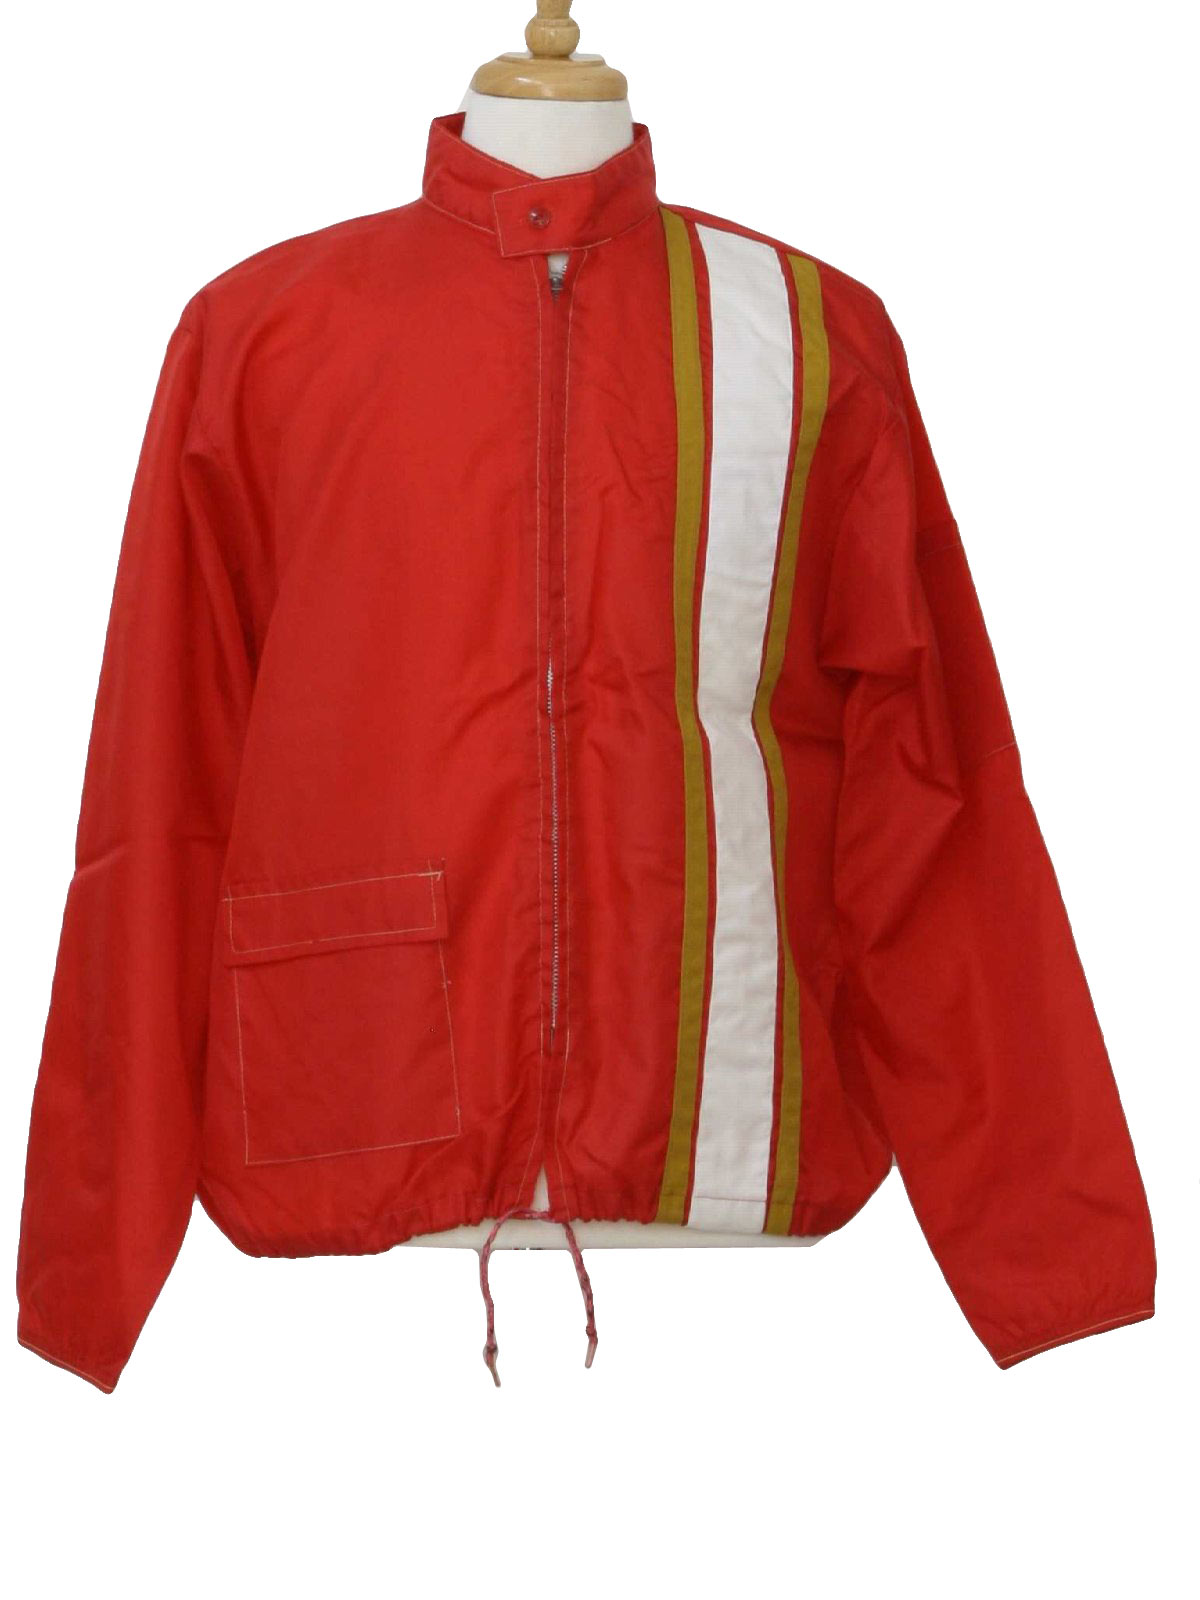 Vintage Sportswear 60's Jacket: 60s -Sportswear- Mens red, old gold and ...